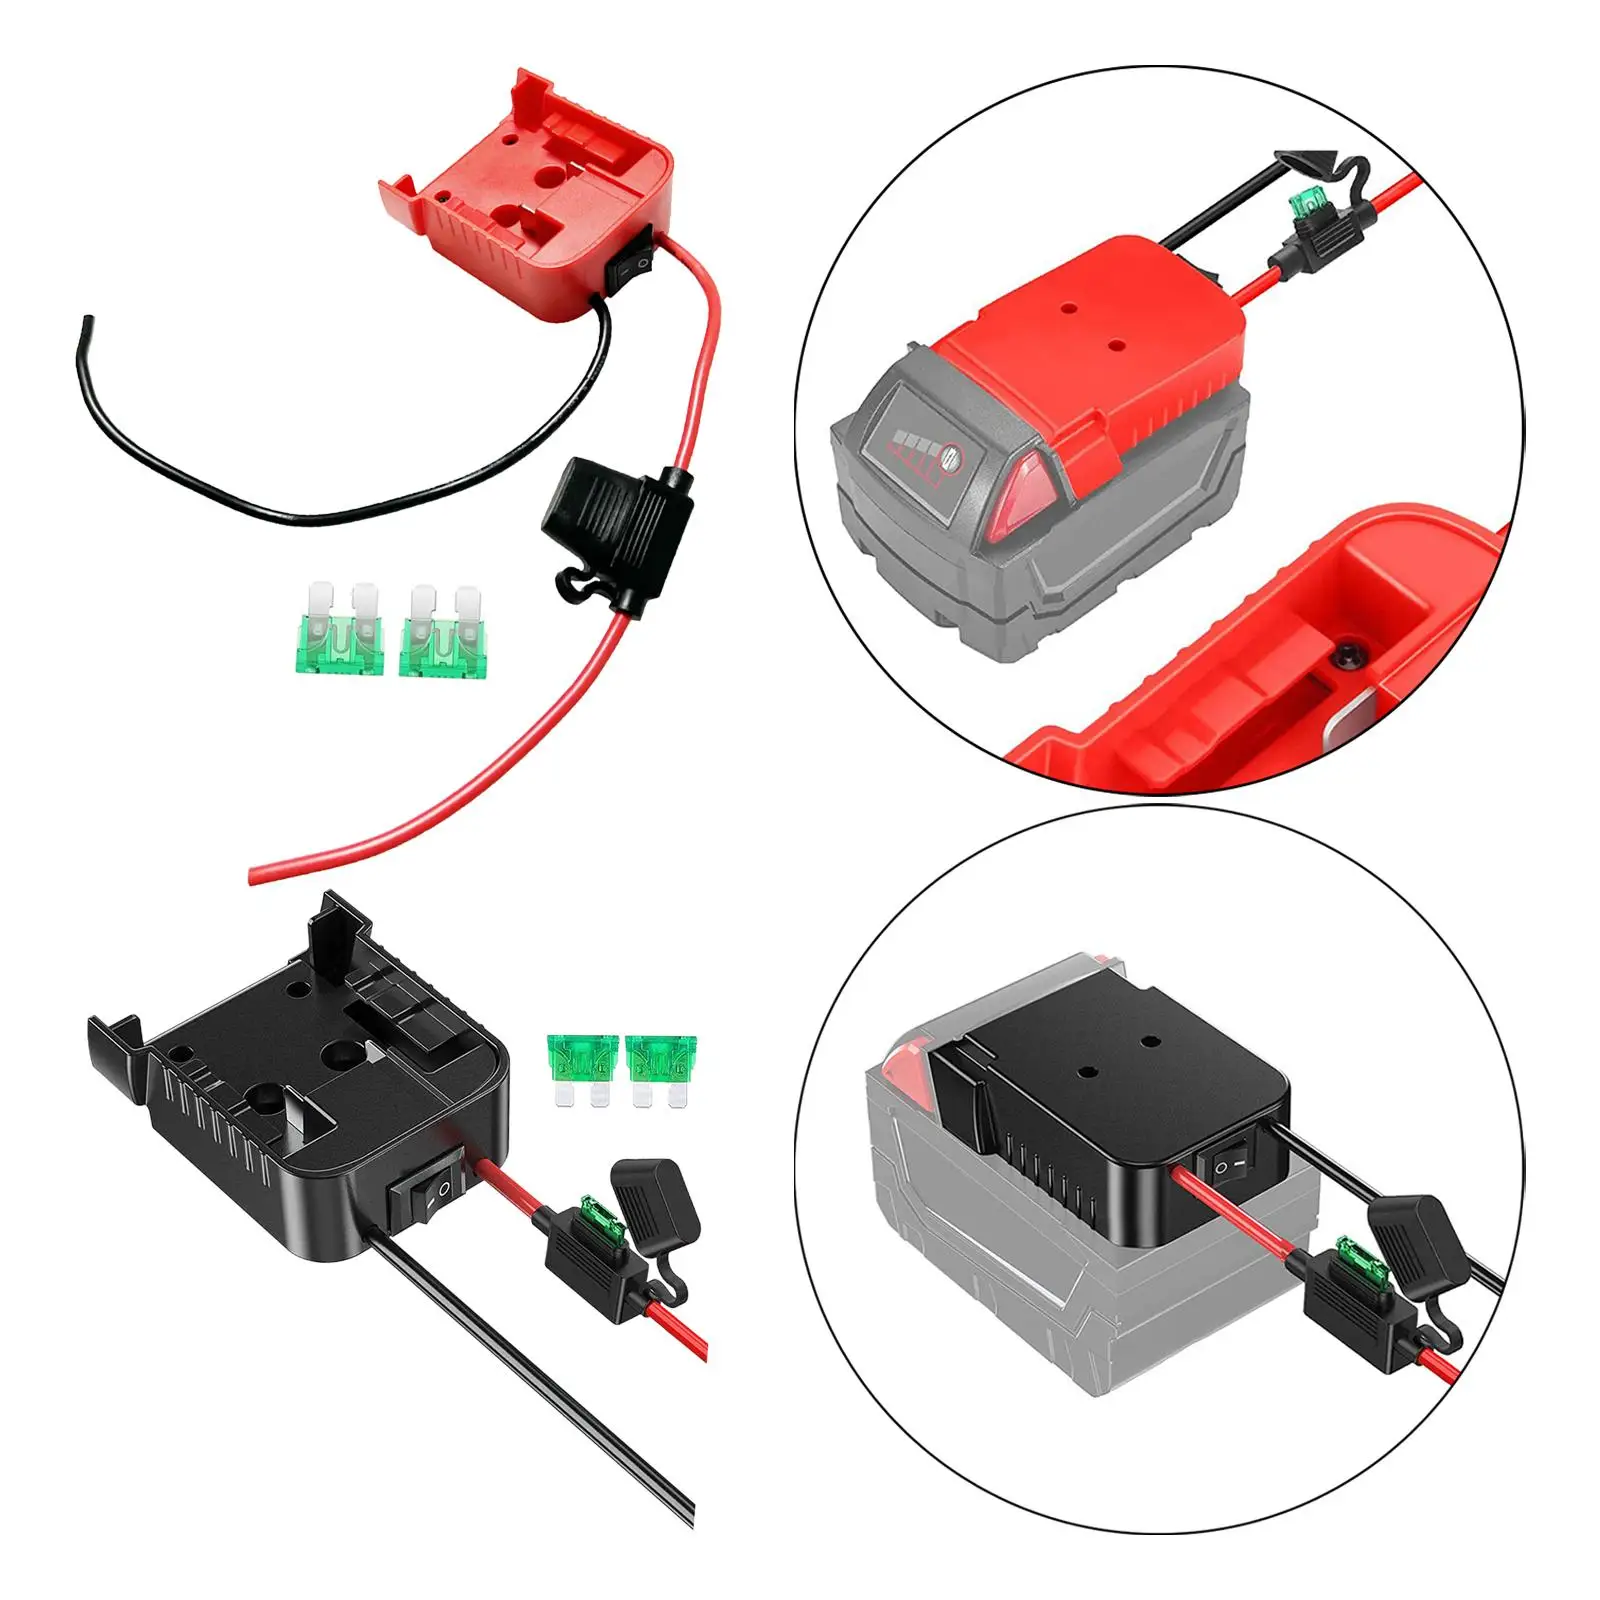 Battery Adapter Converter Accessories Power Compatible Adapter Conversion Interface toolset for M18